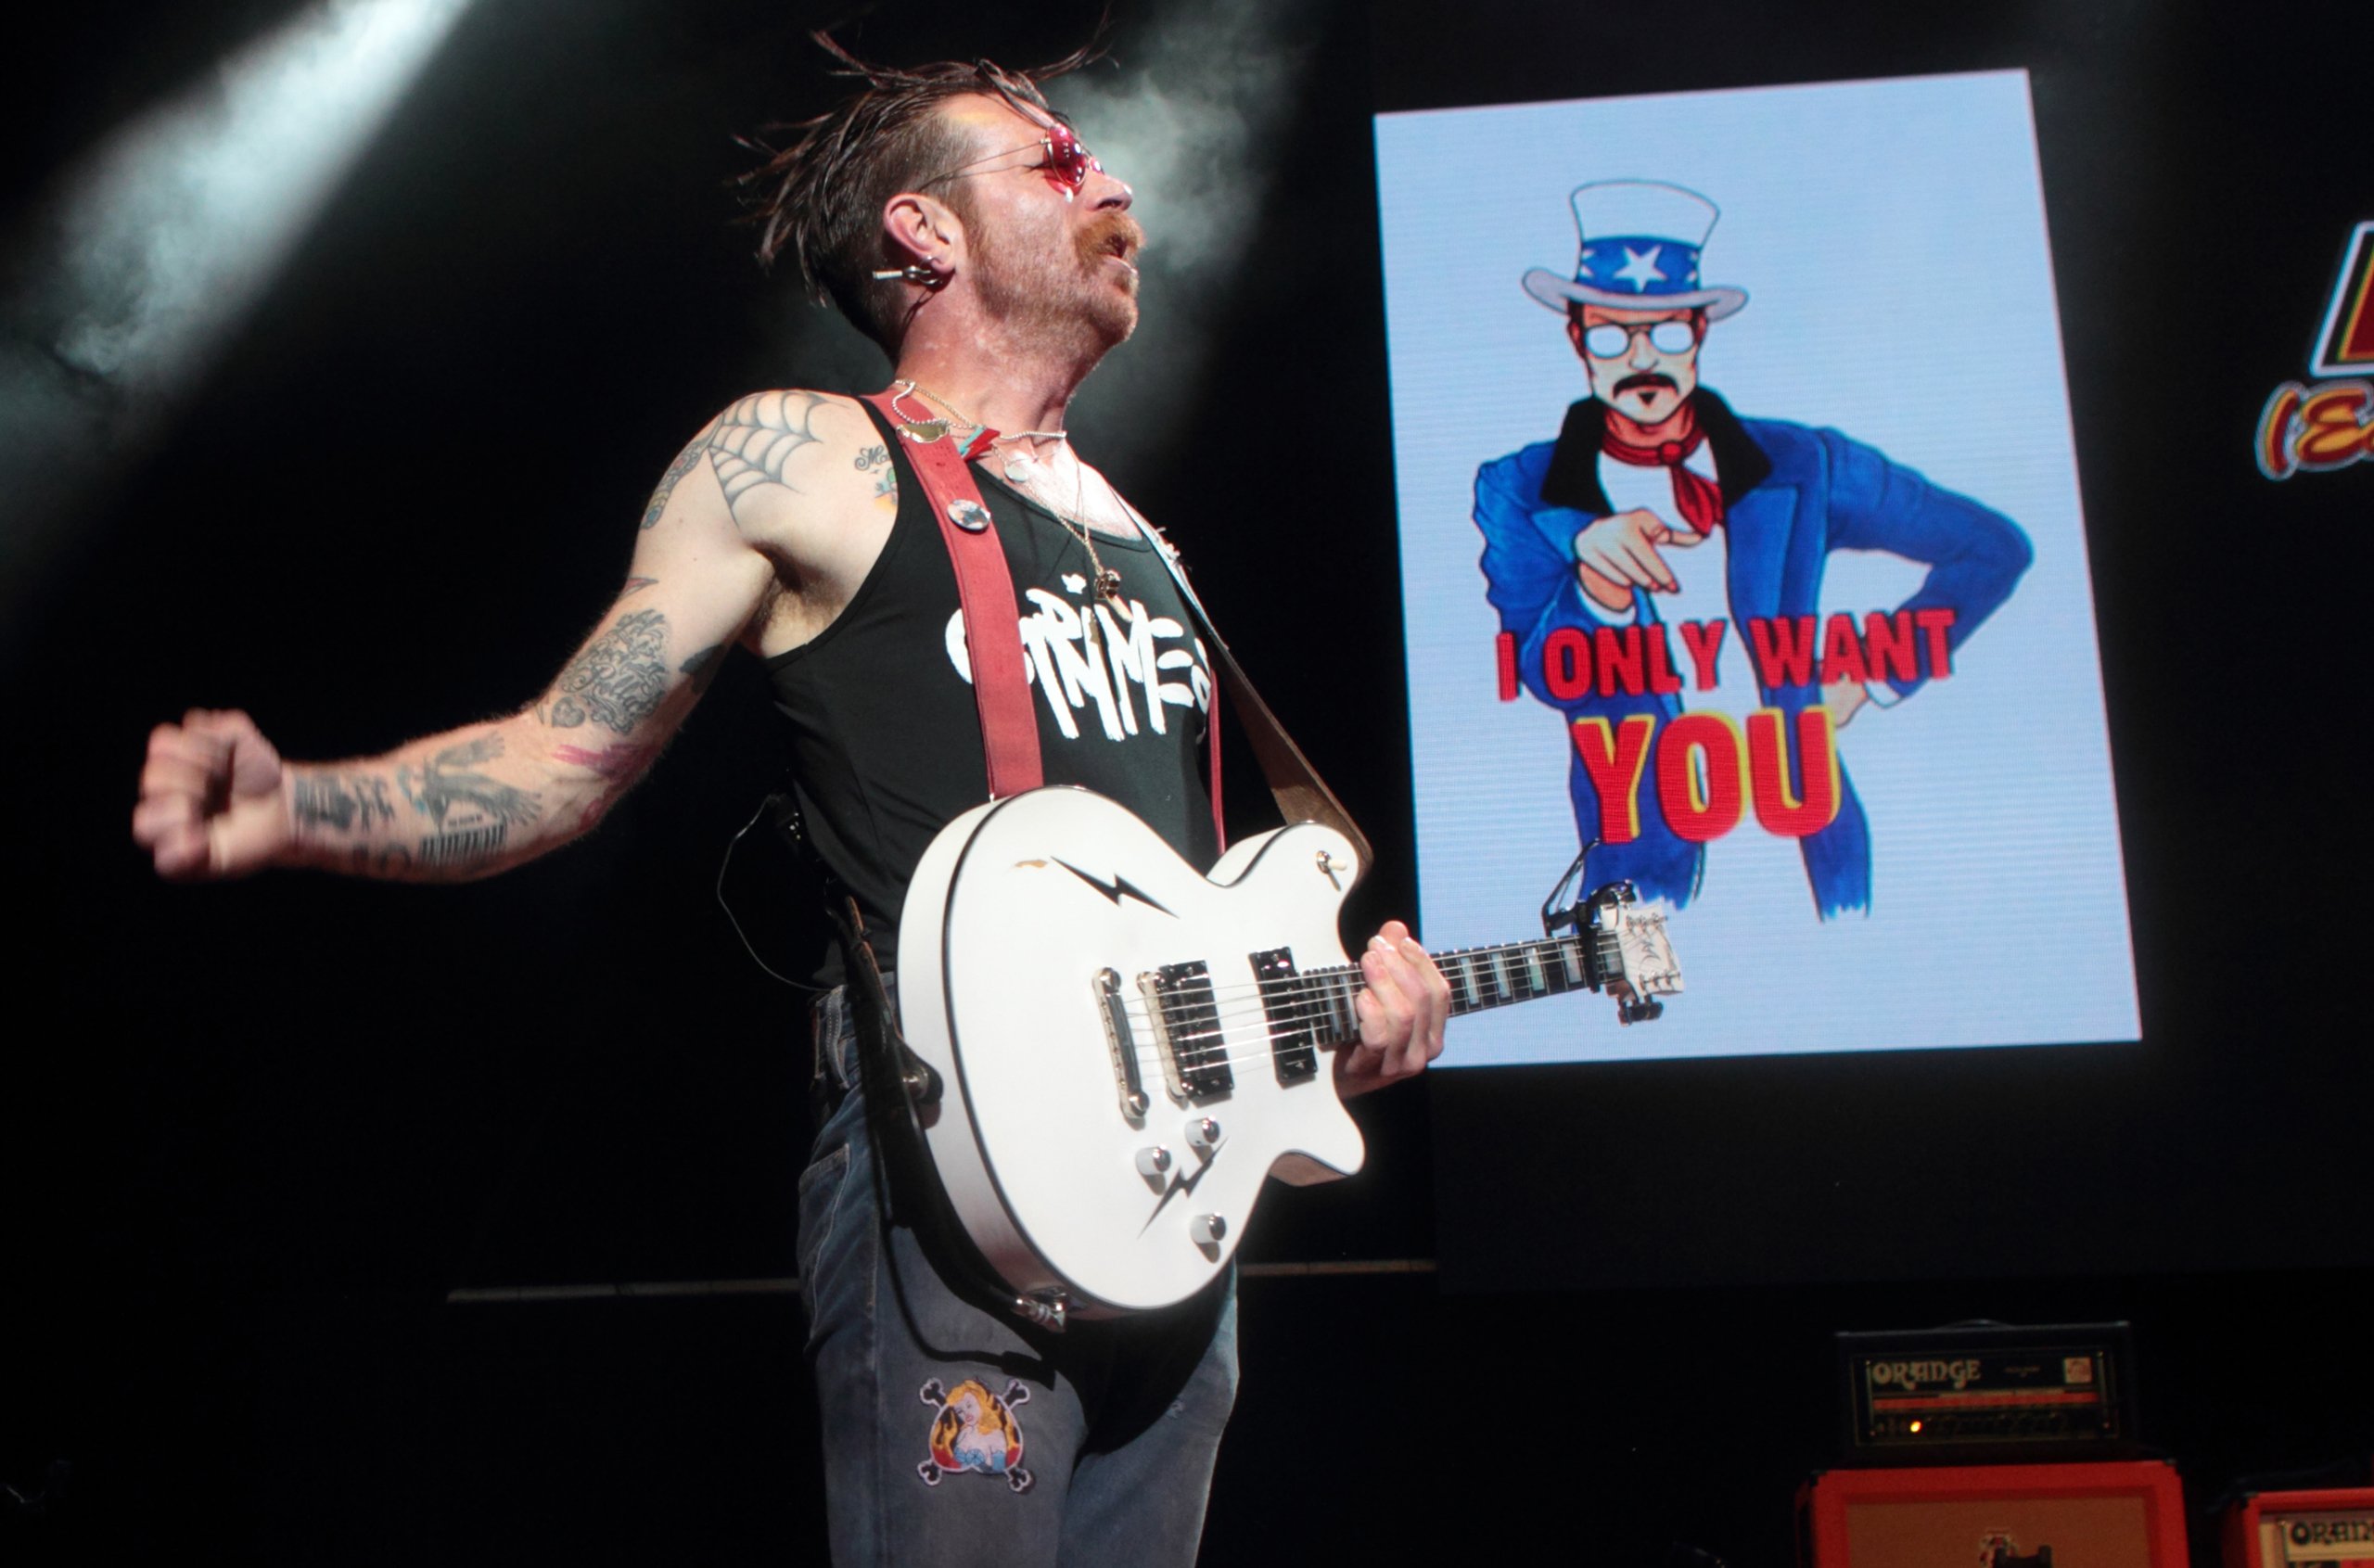 Jesse Hughes of Eagles of Death Metal performs during the Sweetlife Festival at Merriweather Post Pavilion in Columbia, Md., on May 14, 2016. (Owen Sweeney—Invision/AP)